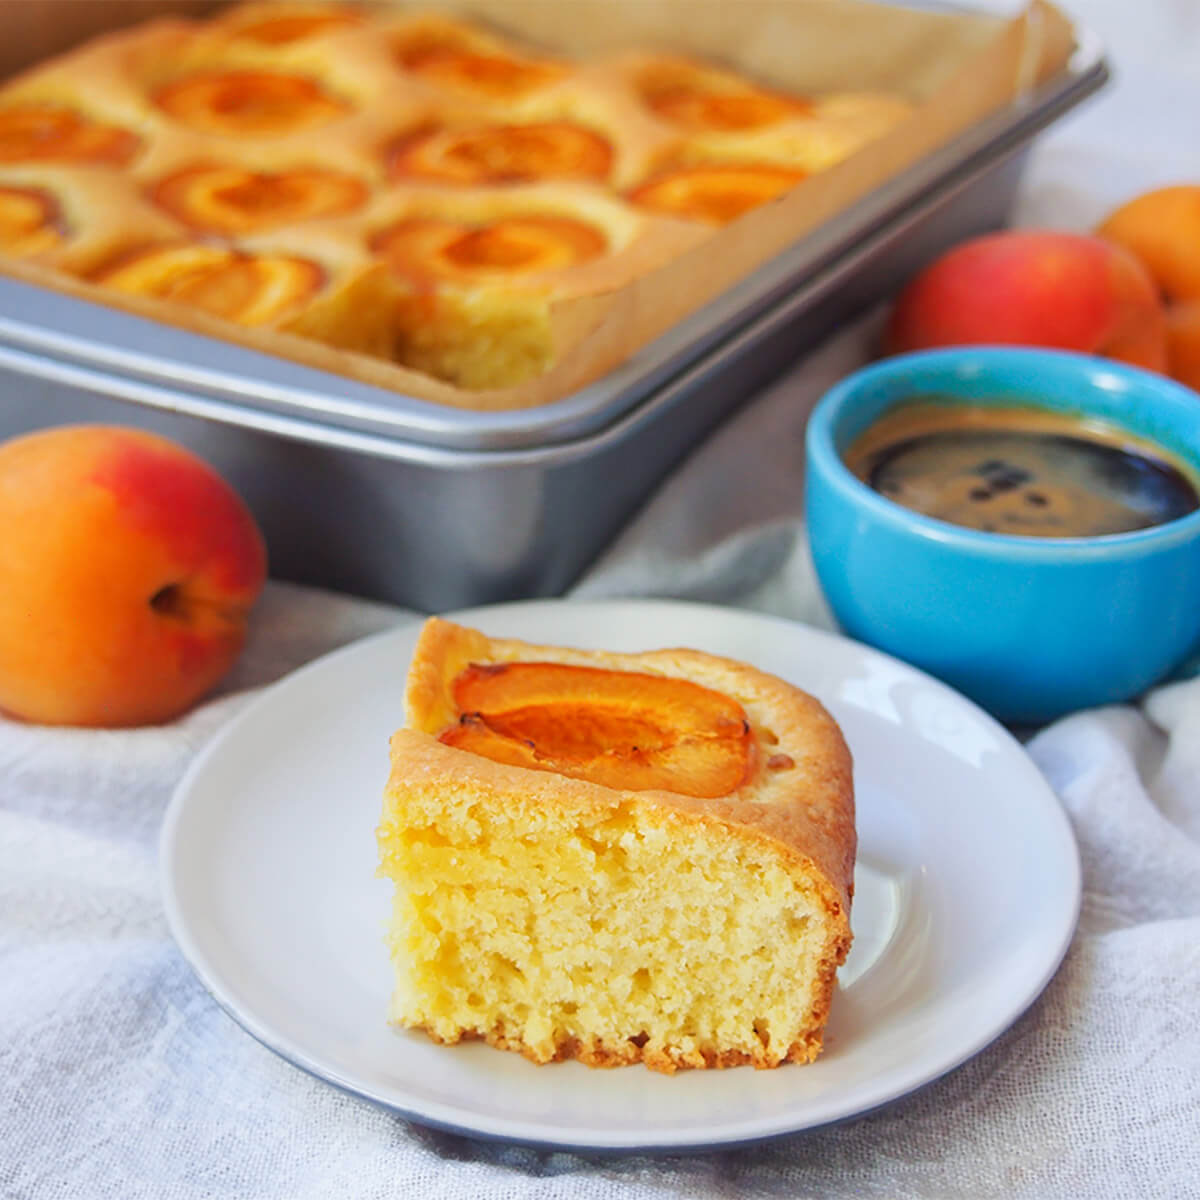 APRICOT ALMOND CAKE WITH ROSEMARY - andrealflavor - Andrea Steffen